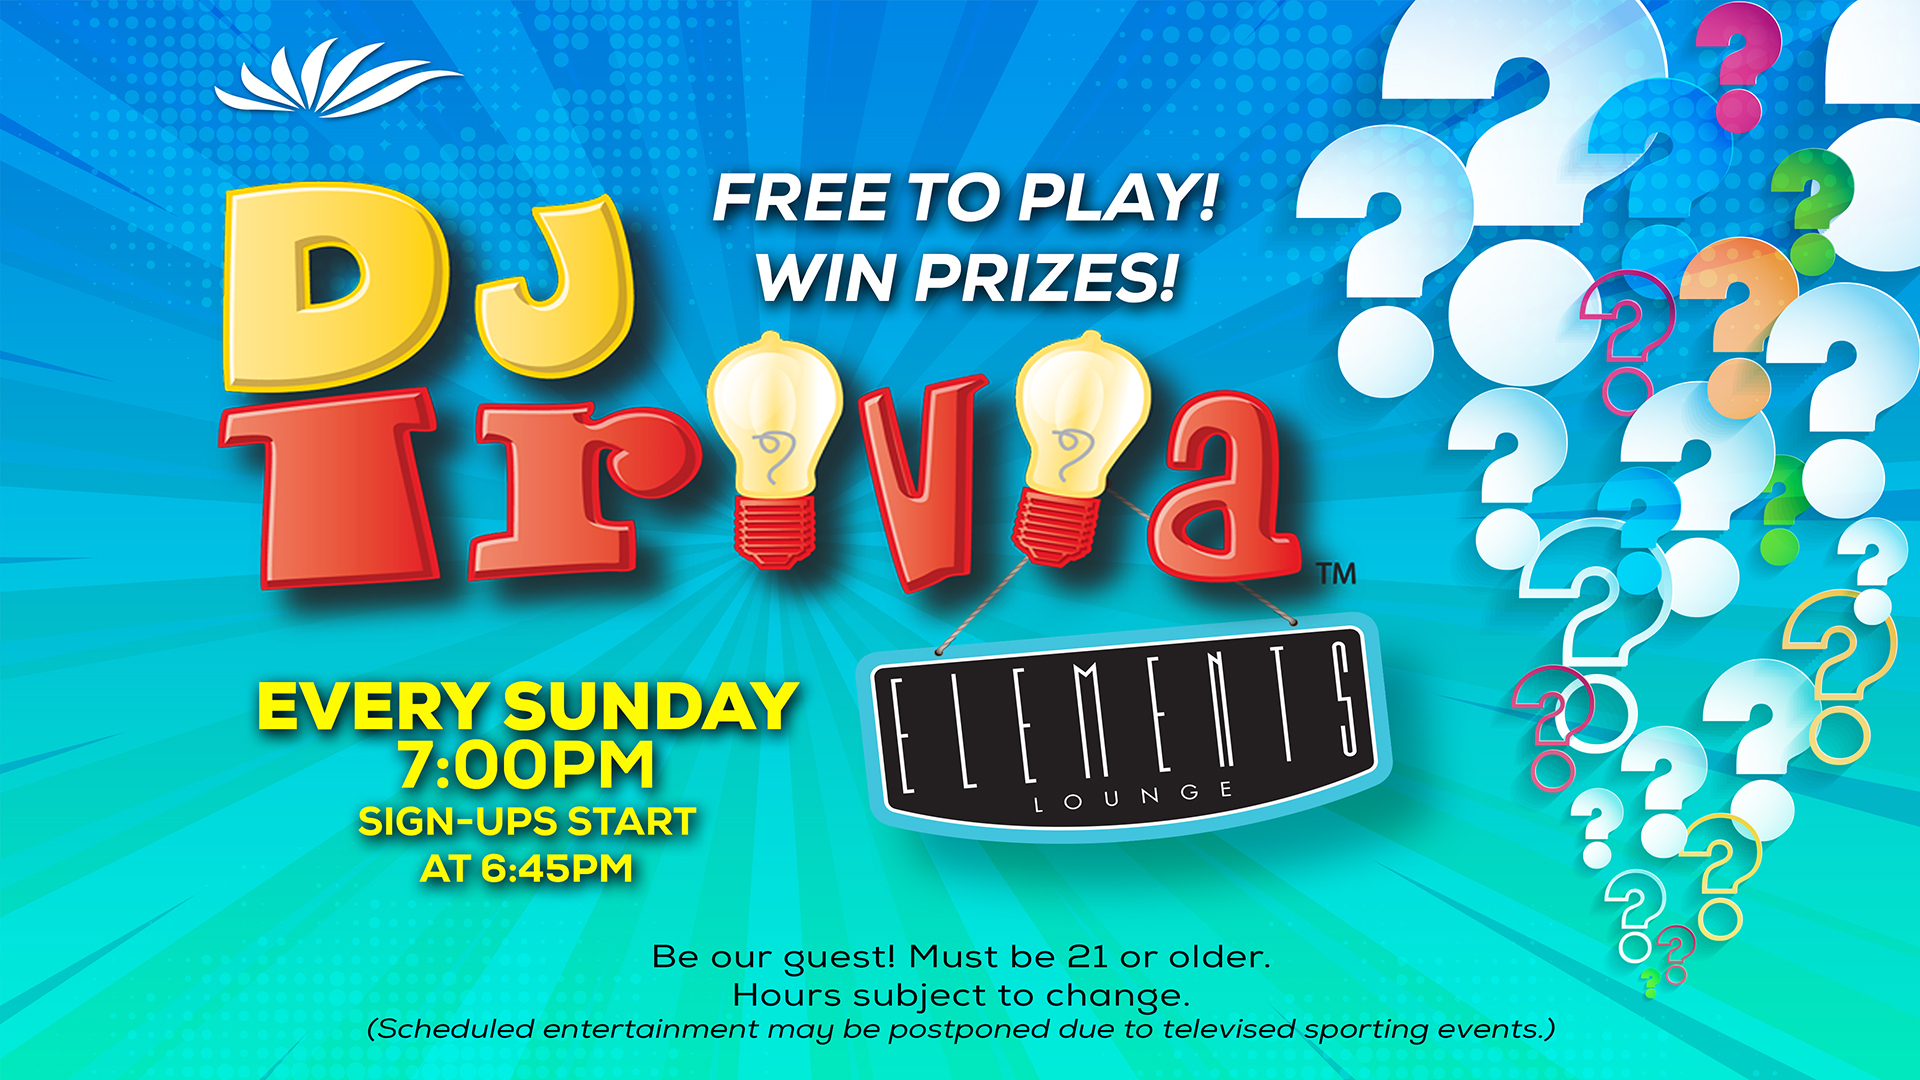 Play DJ Trivia At Seven Feathers Casino Resort In Canyonville Oregon Every Sunday Night For A Chance To Win Fun Prizes